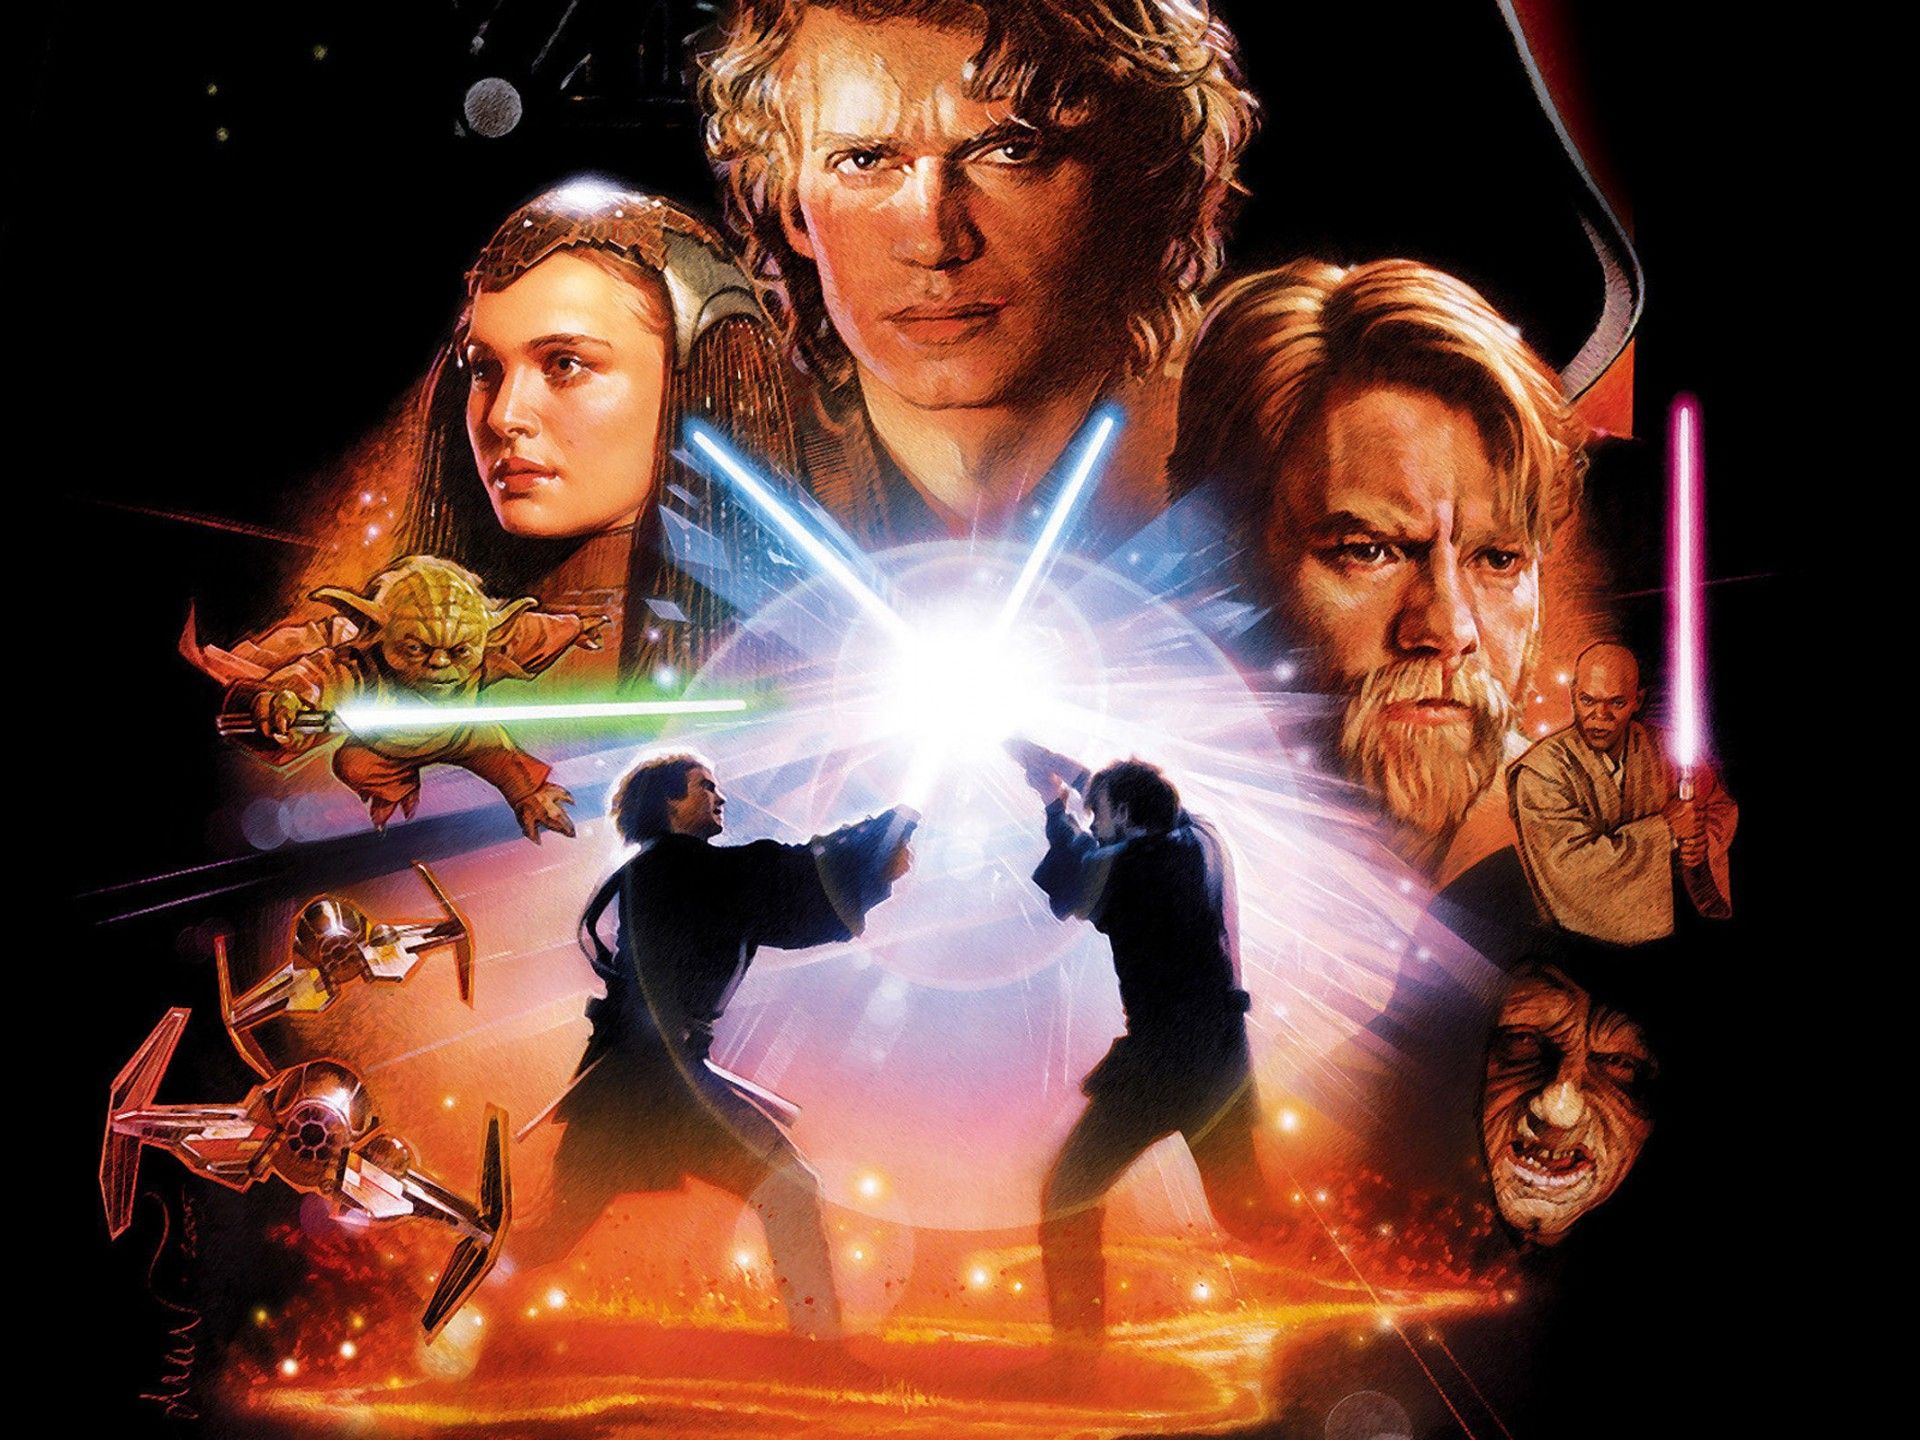 Revenge of the Sith Wallpaper. Sith